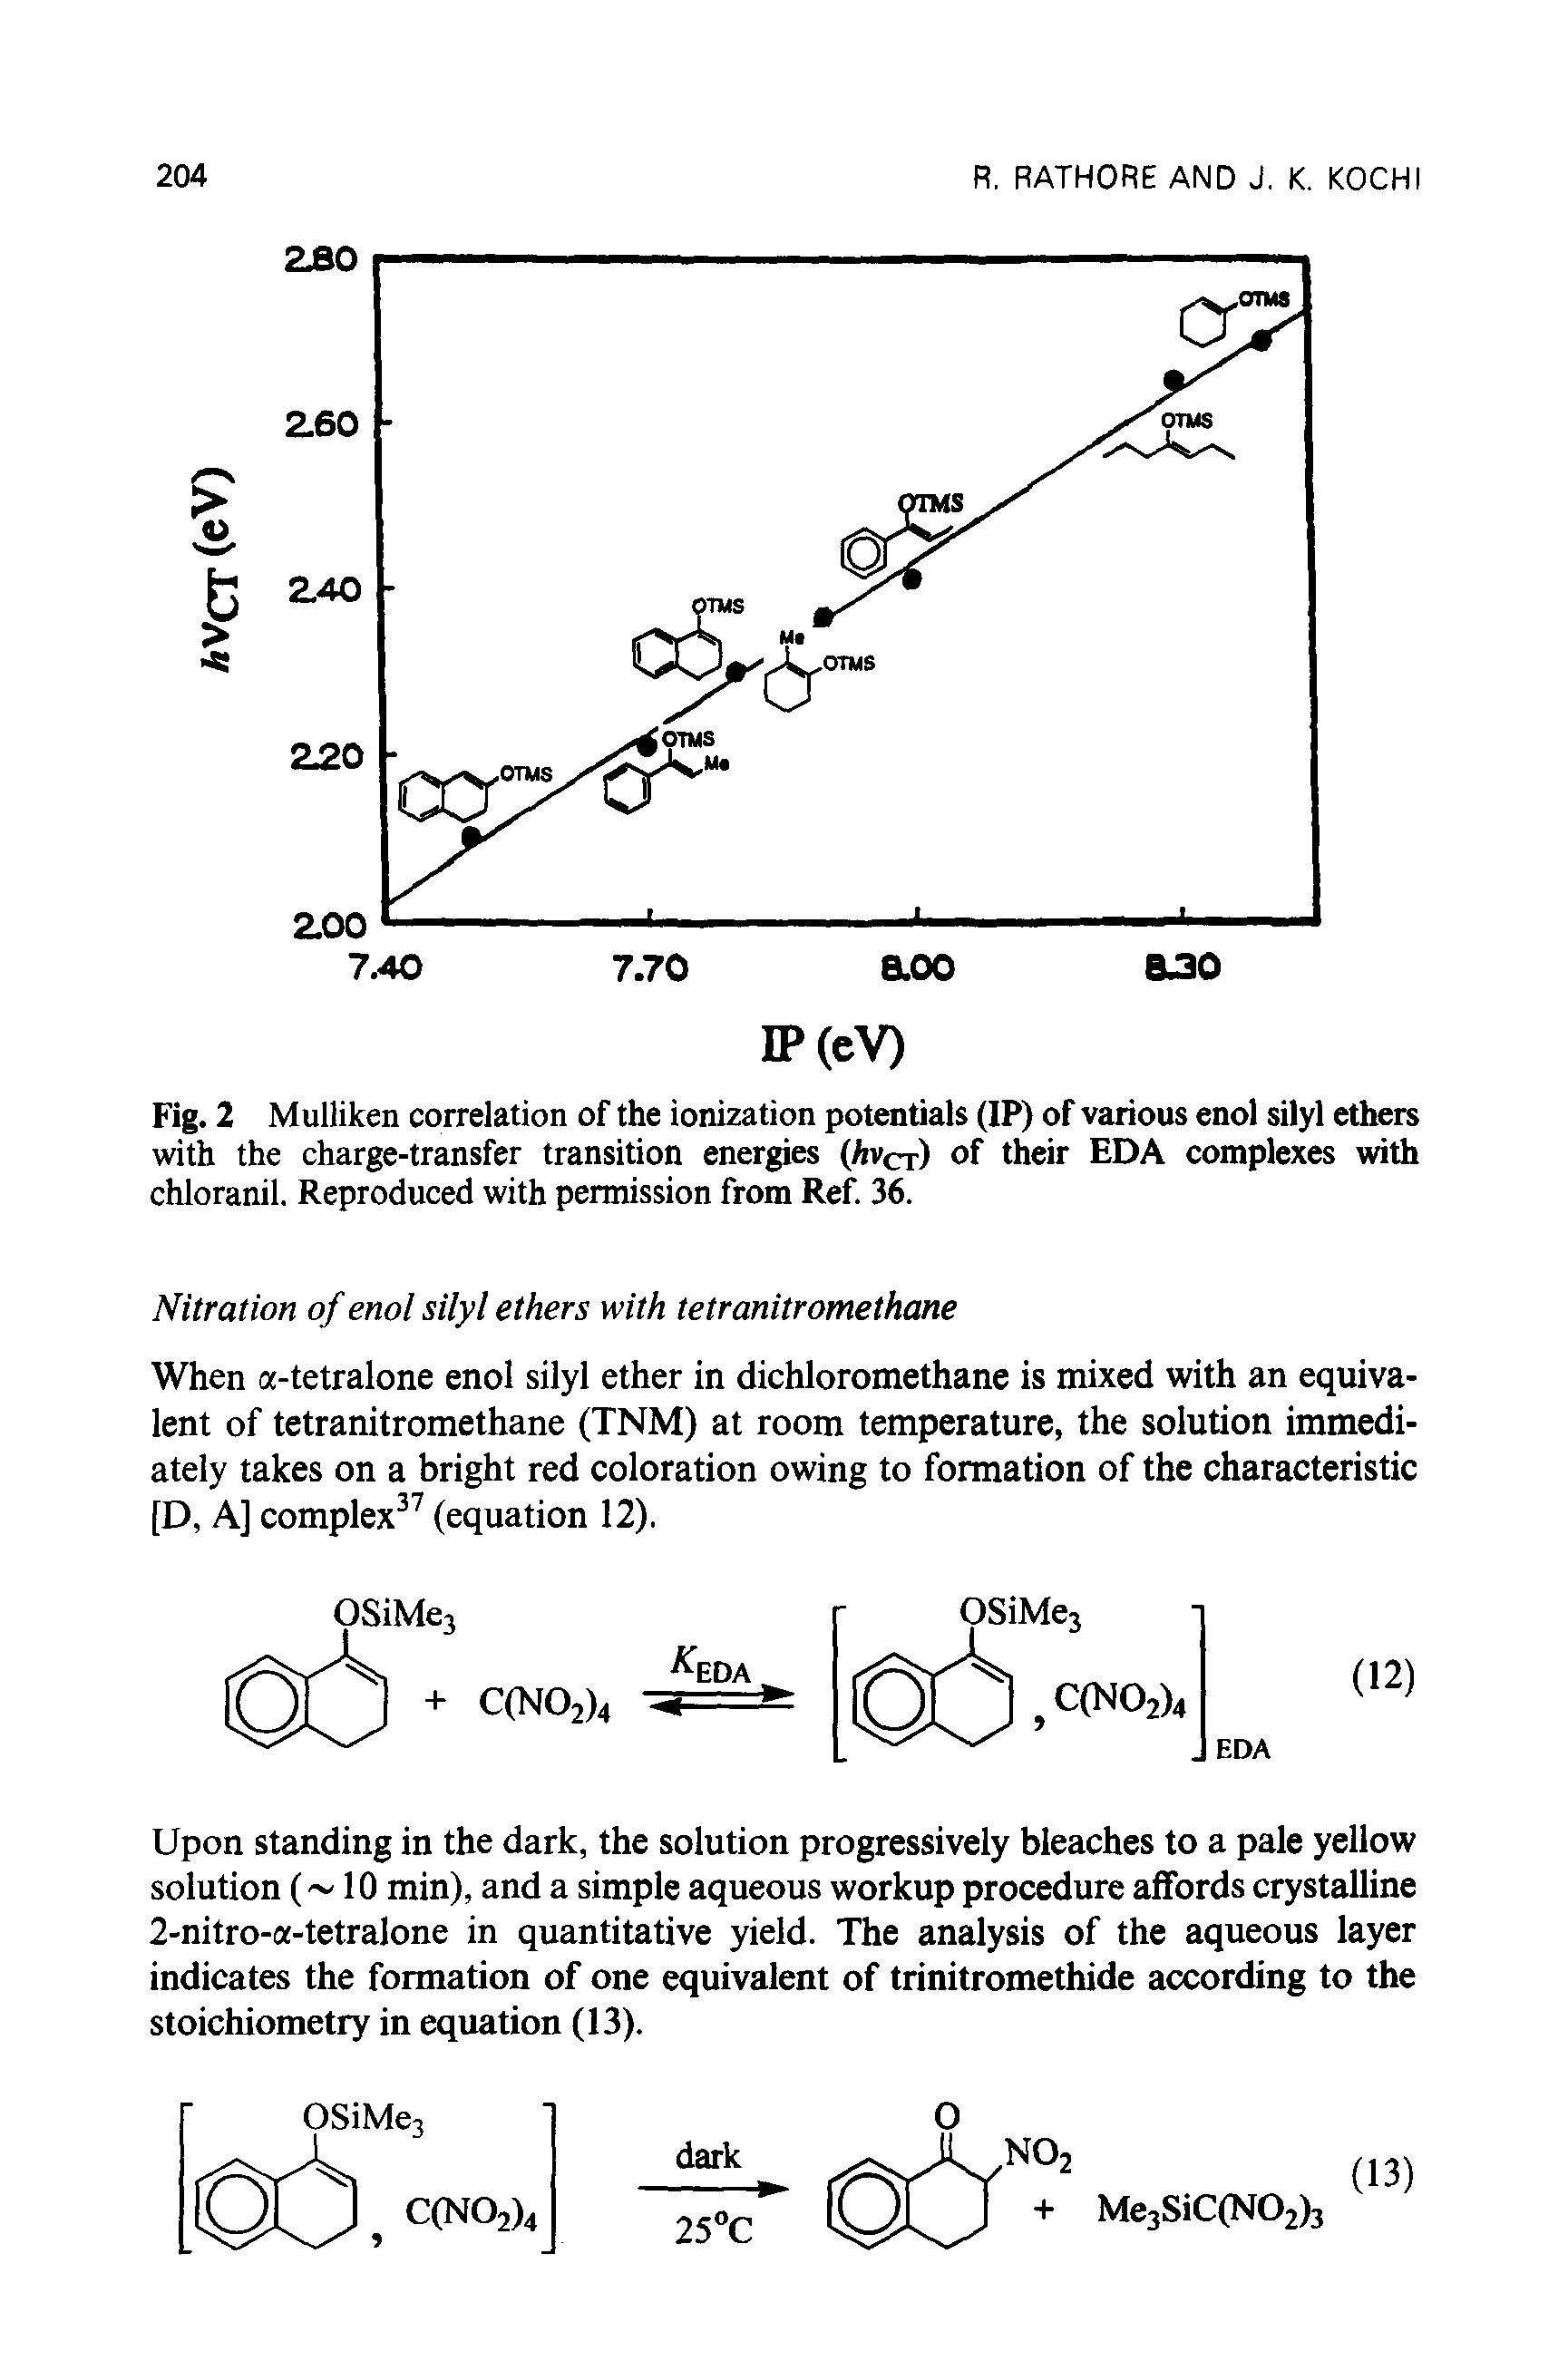 Fig. 2 Mulliken correlation of the ionization potentials (IP) of various enol silyl ethers with the charge-transfer transition energies (/jvct) of their EDA complexes with chloranil. Reproduced with permission from Ref. 36.